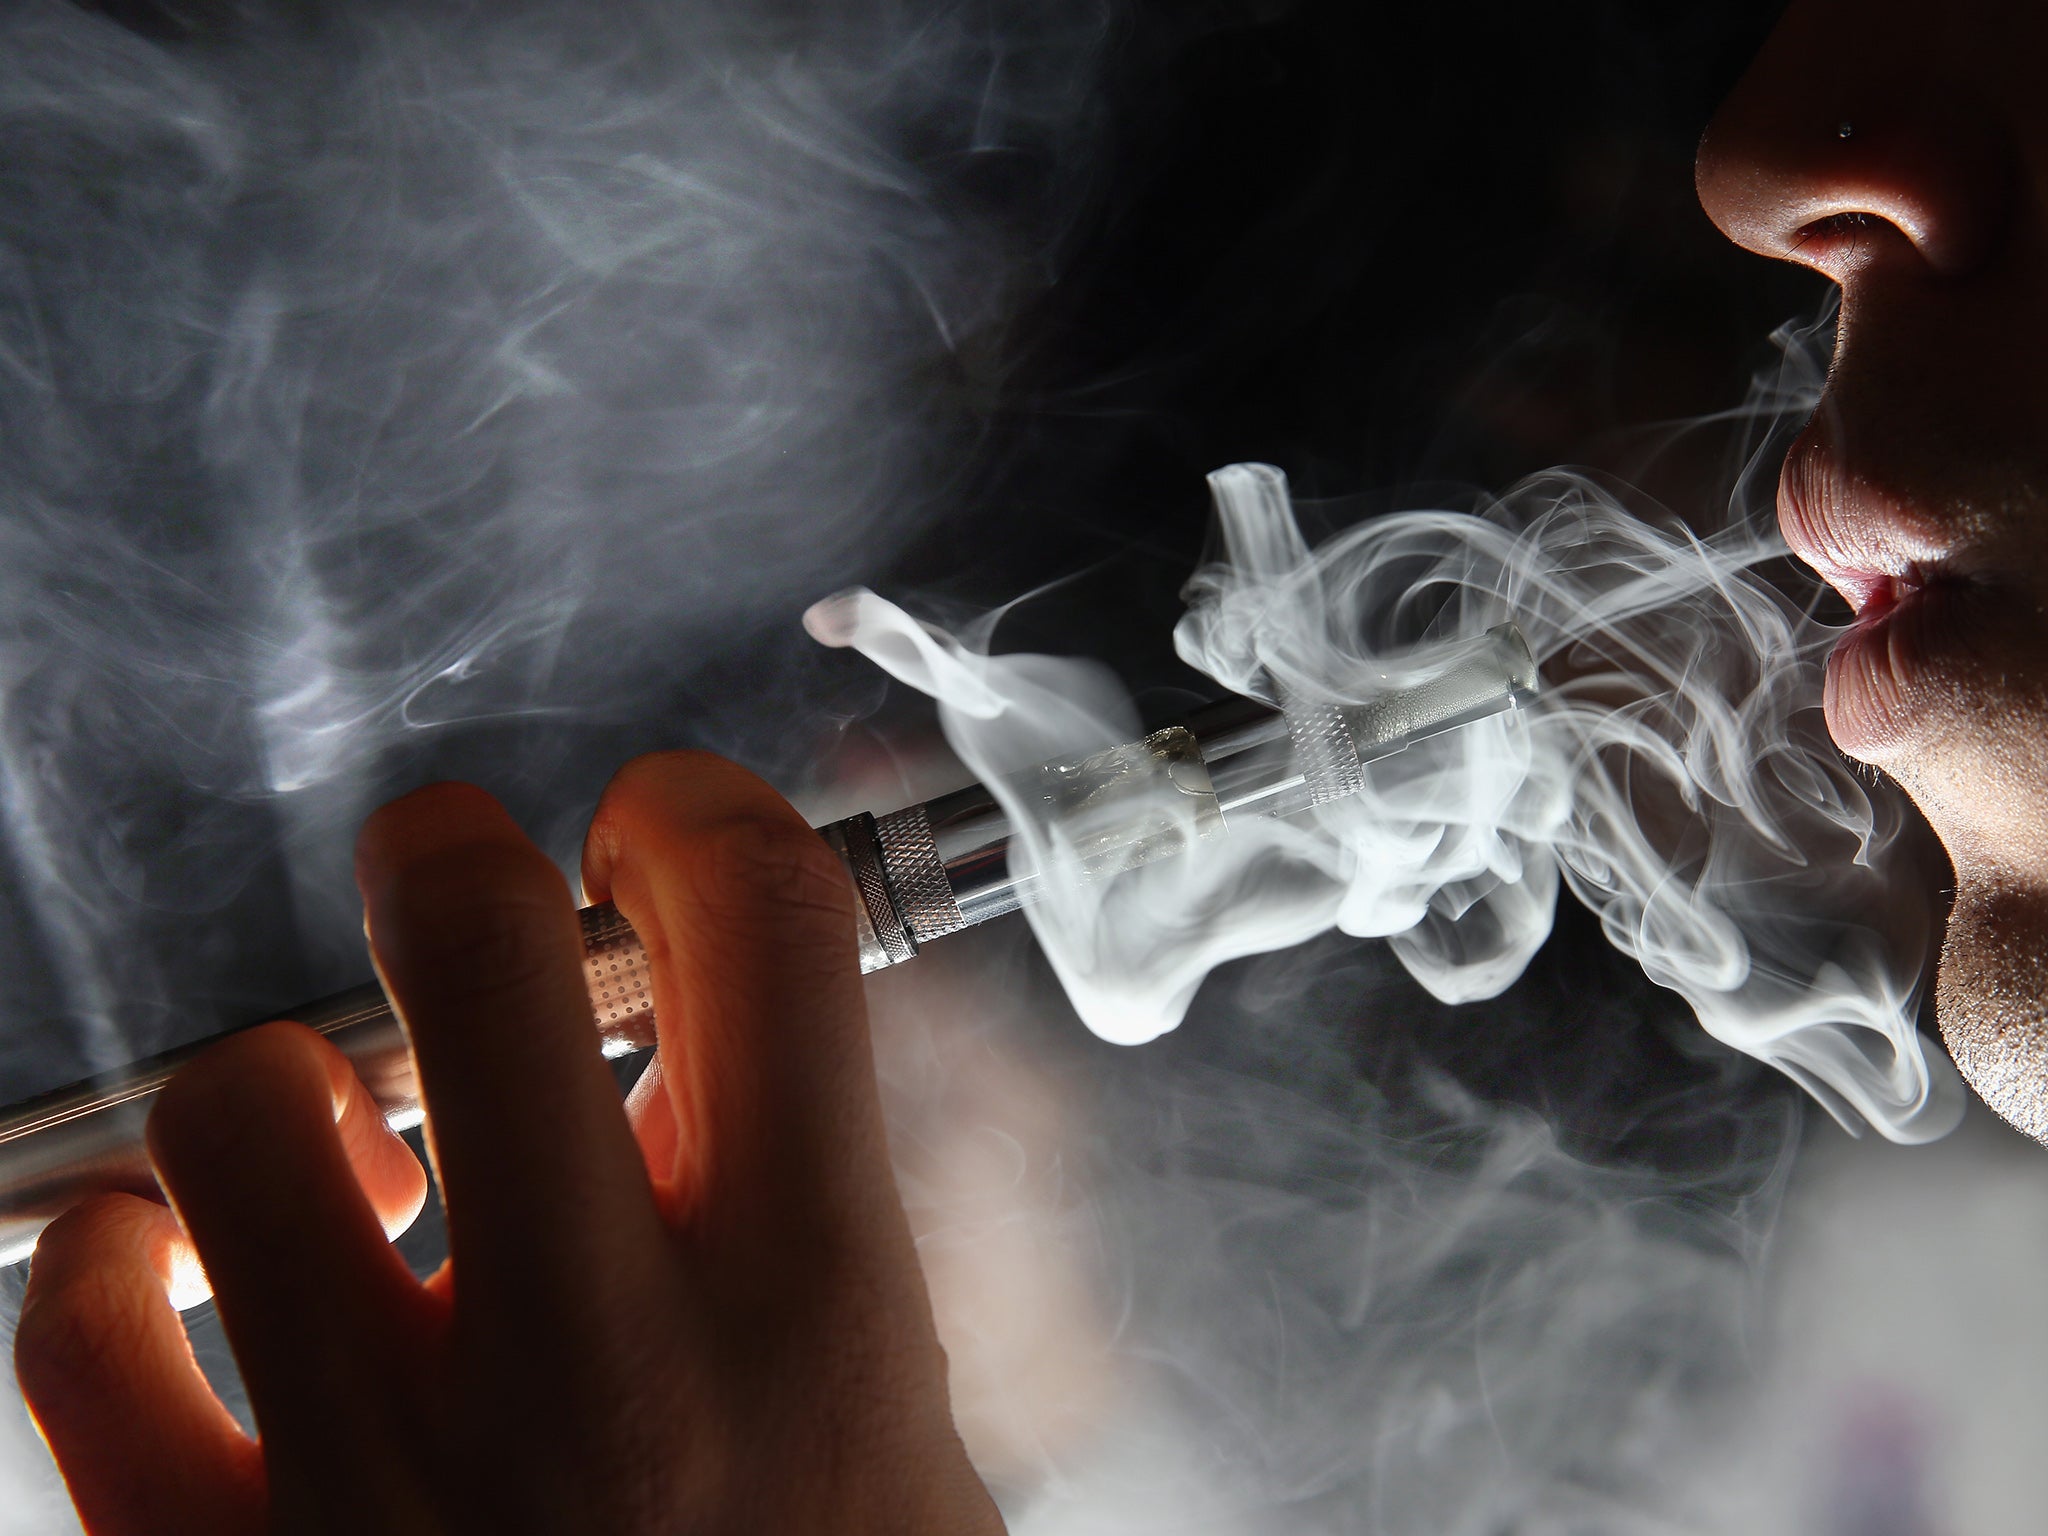 More than three million people use vape machines in the UK